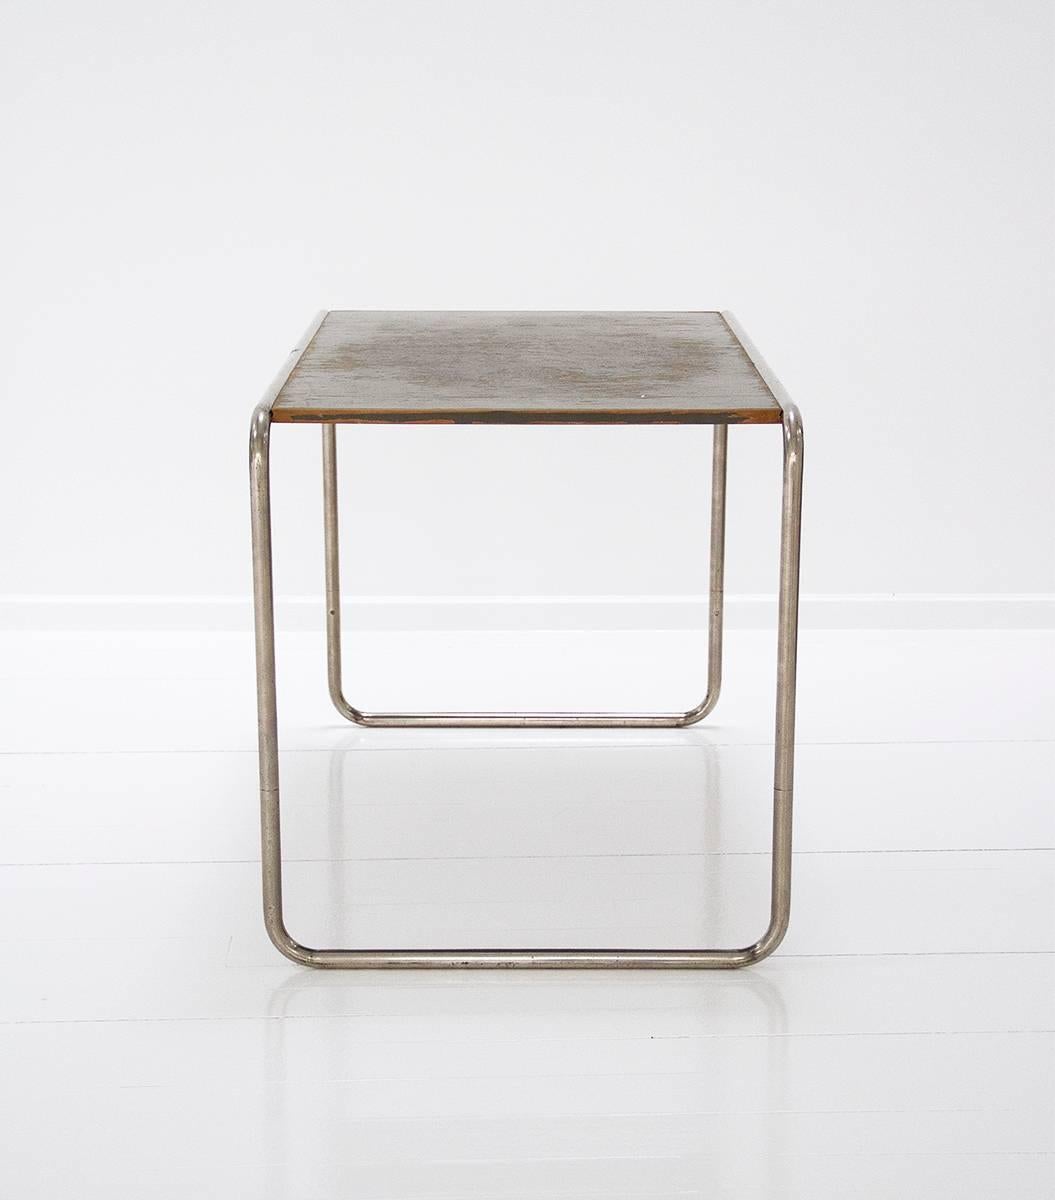 Table Designed by Marcel Breuer, Chromed Tubular Steel Lacquered Wood, 1930s For Sale 1